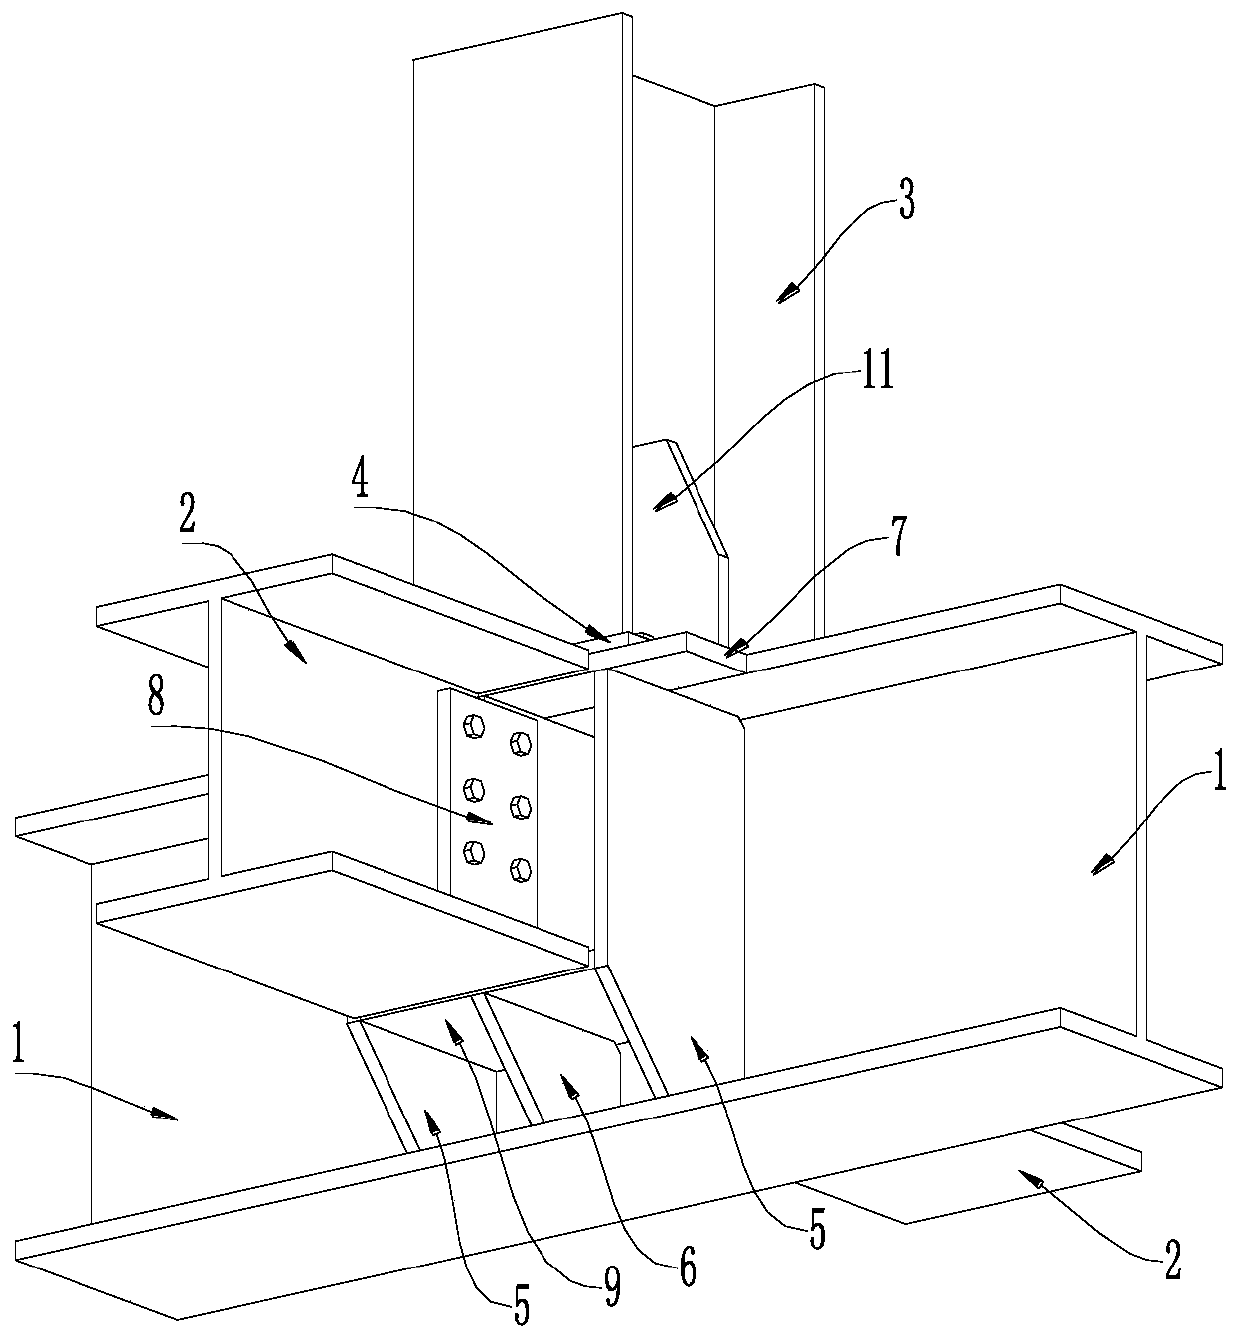 Connection joint structure of steel column supported by steel beams